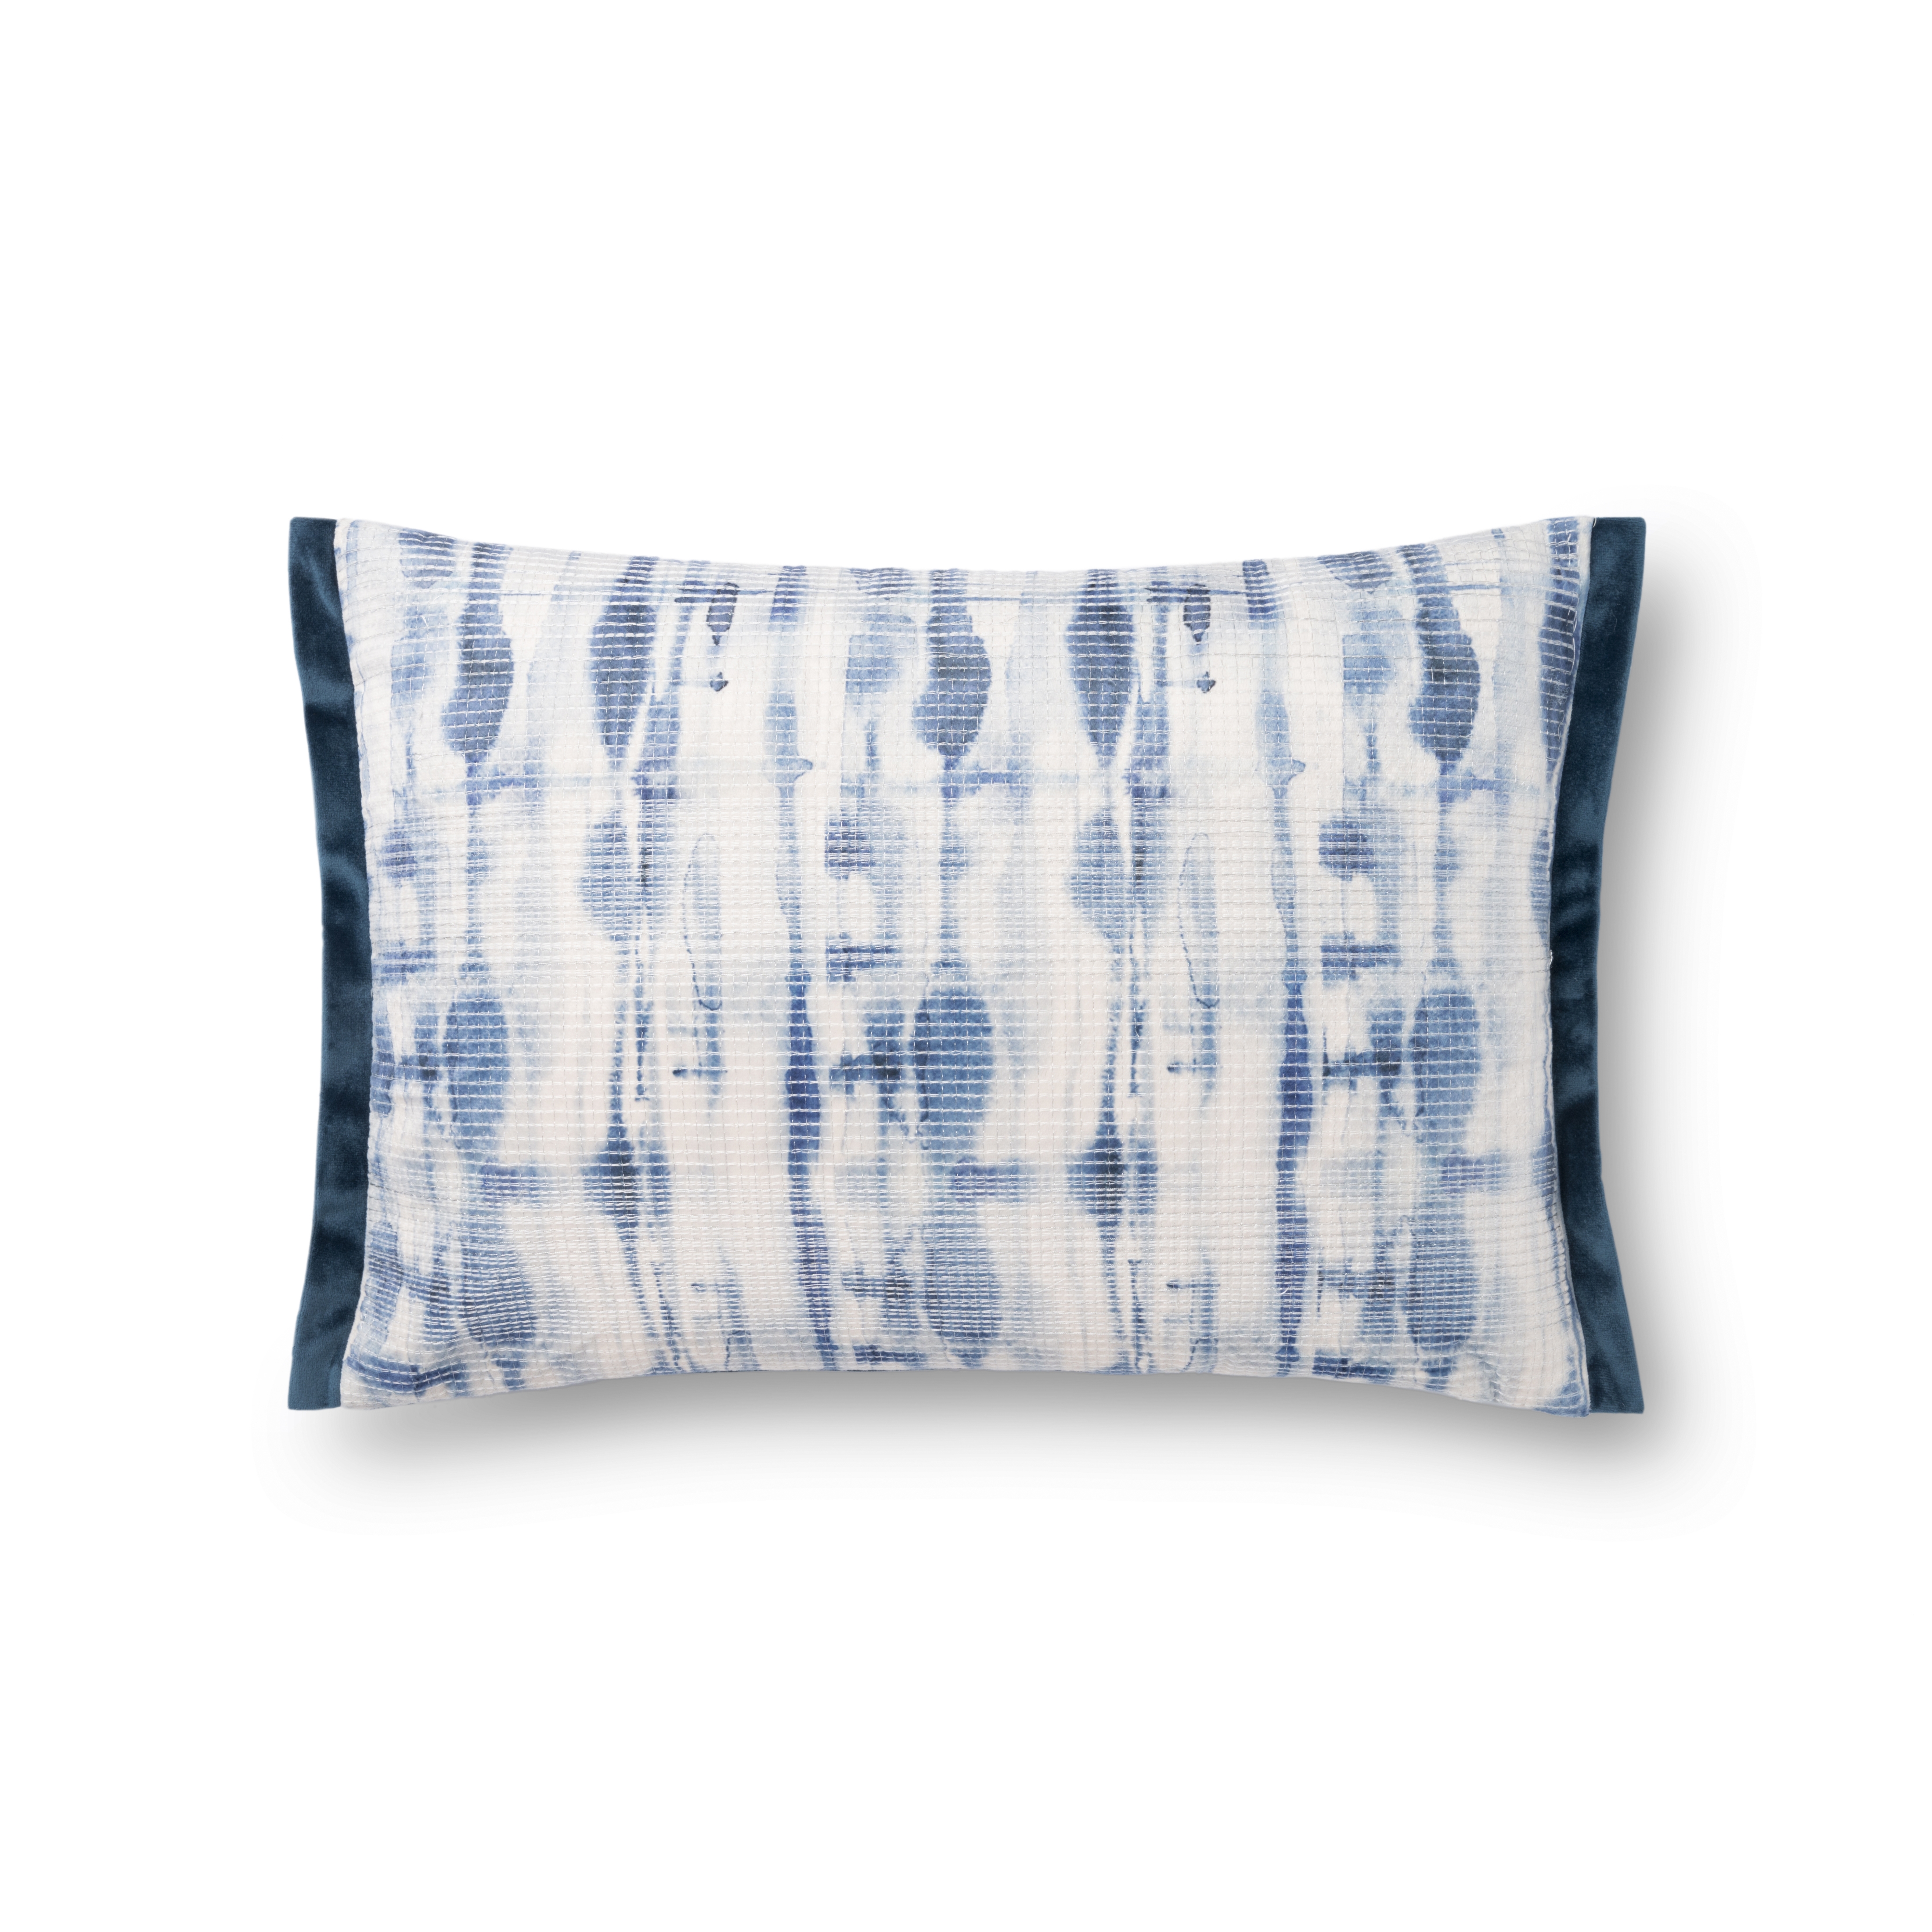 Justina Blakeney x Loloi PILLOWS P0844 Blue 13" x 21" Cover Only - Image 0